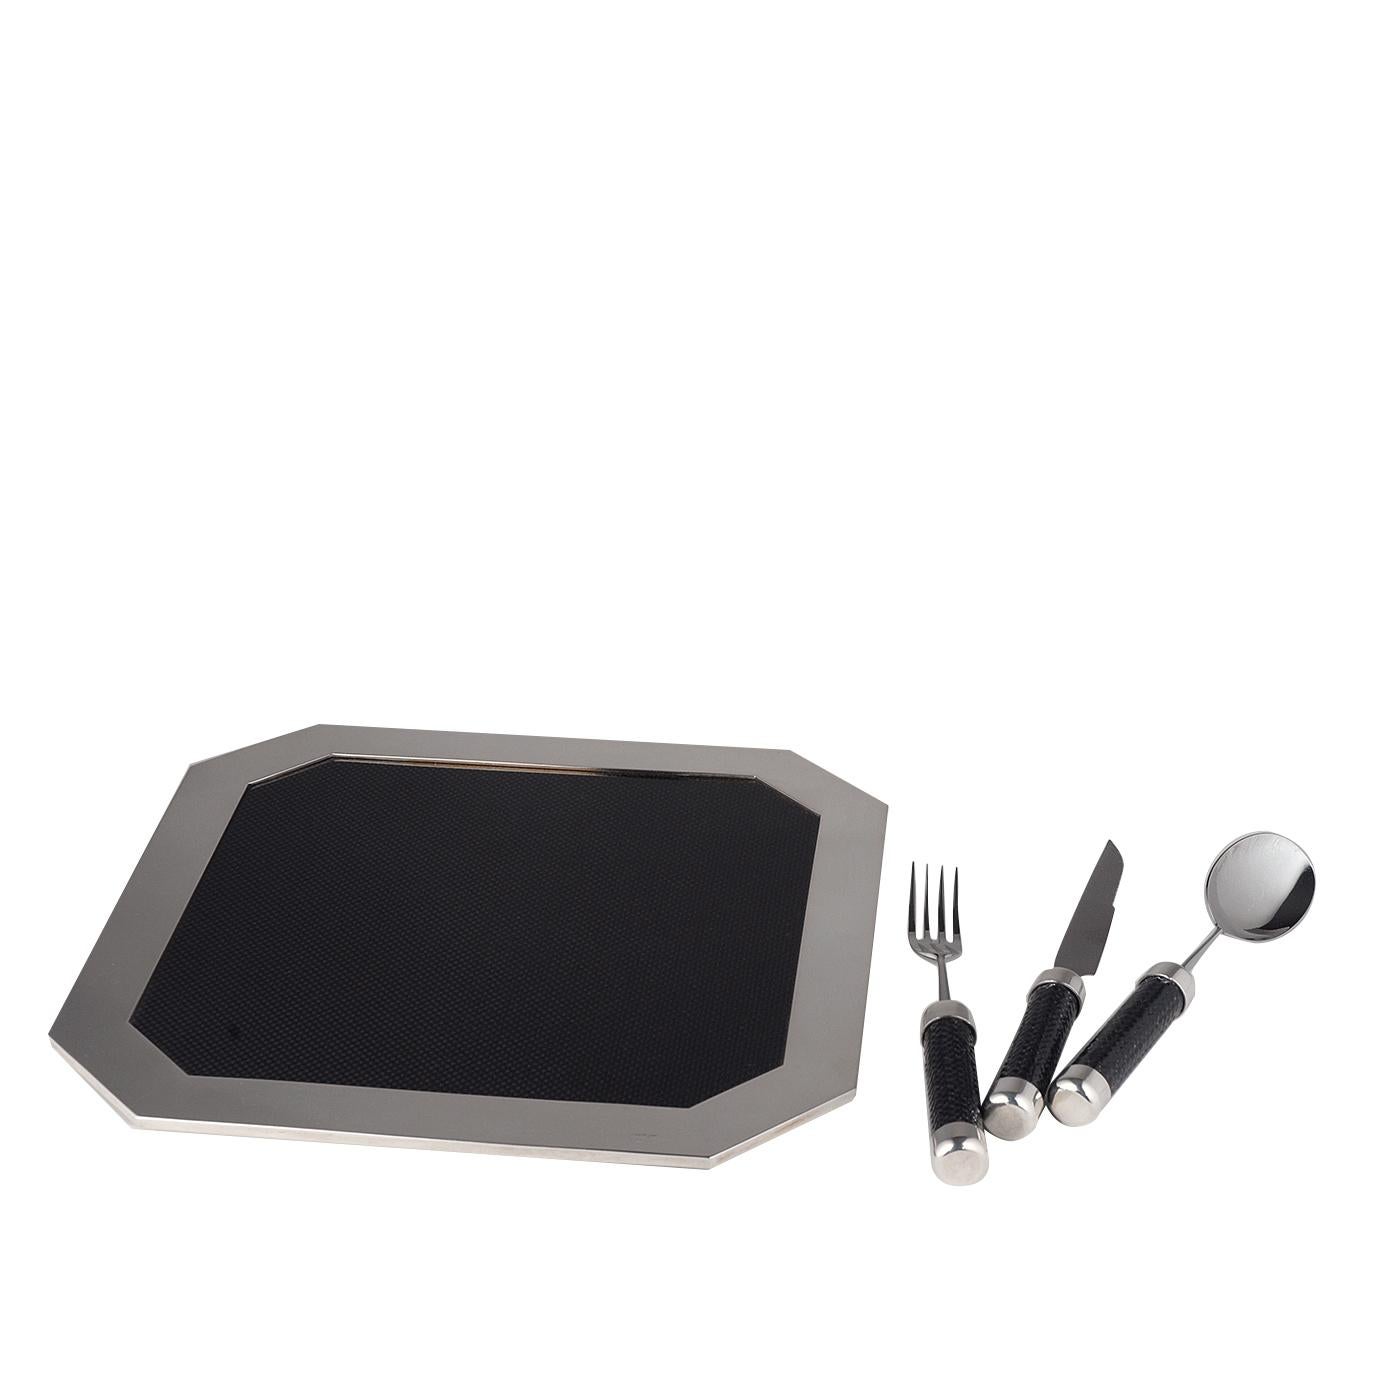 This sophisticated set is comprised of one octagonal-shaped charger and three pieces of flatware (a fork, a knife and a spoon). The charger is in silver plated metal, that doesn't require upkeep, with its bottom highlighted with carbon fiber while